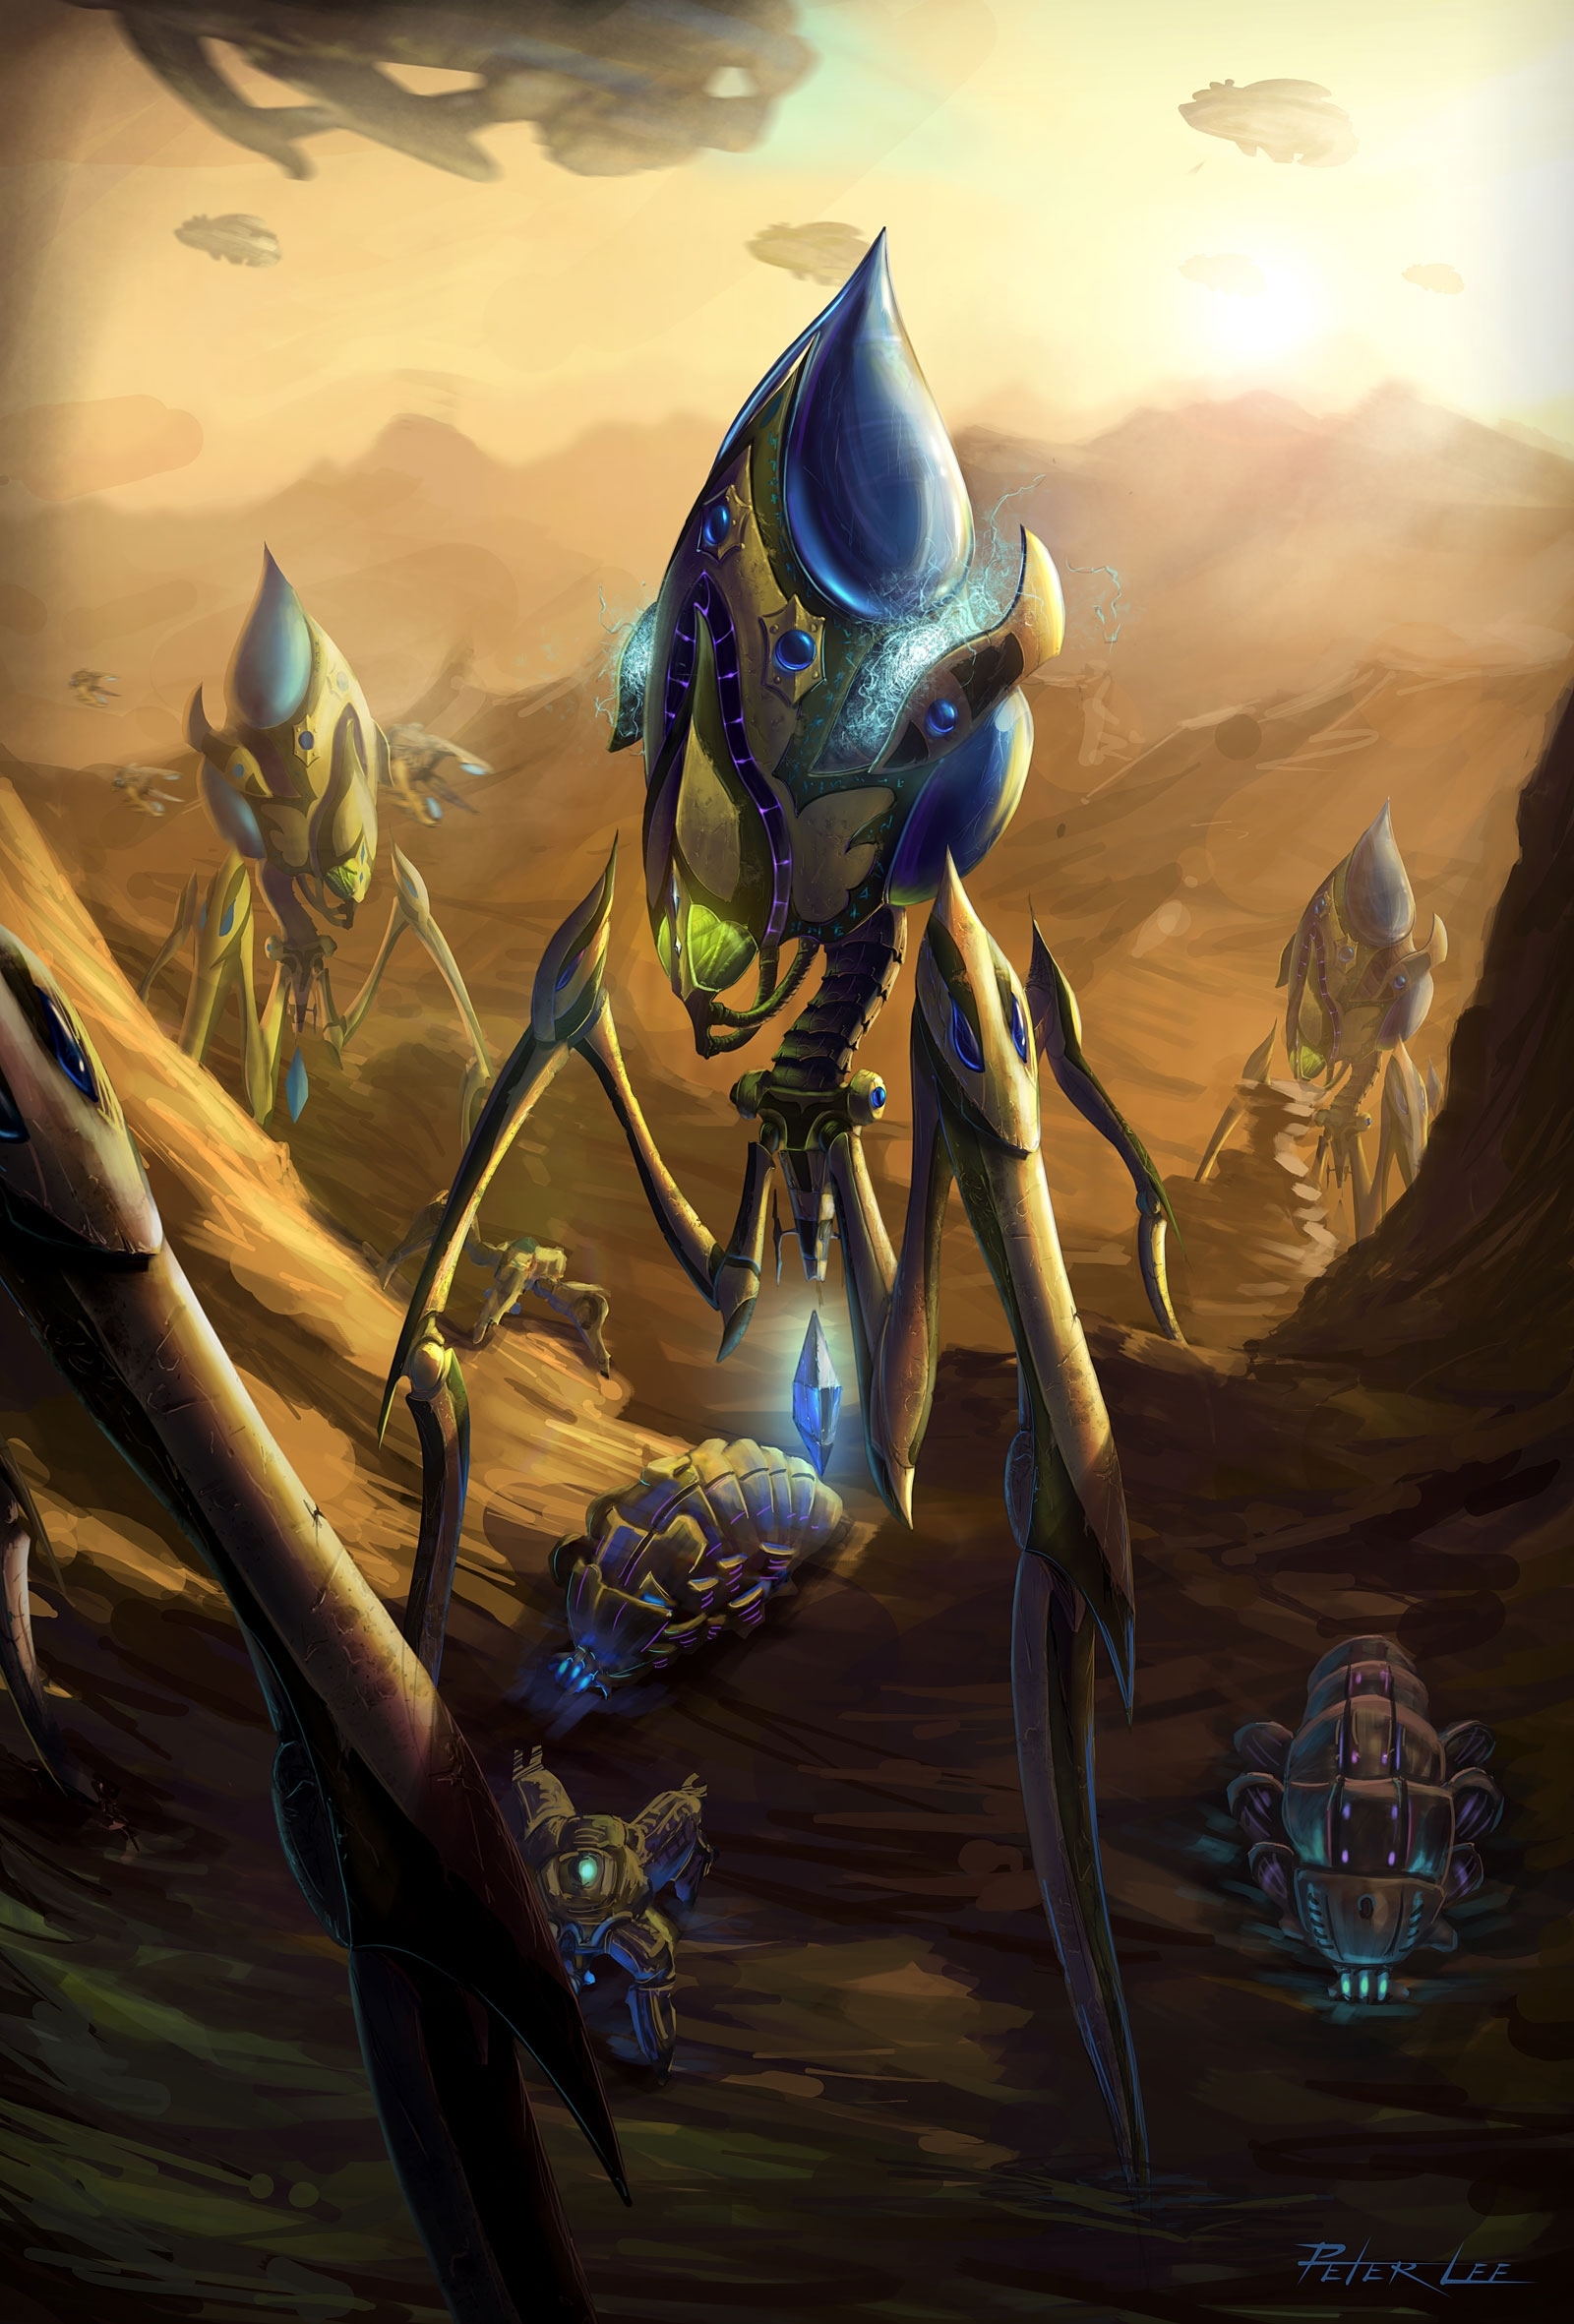 Cool Wallpapers starcraft, games